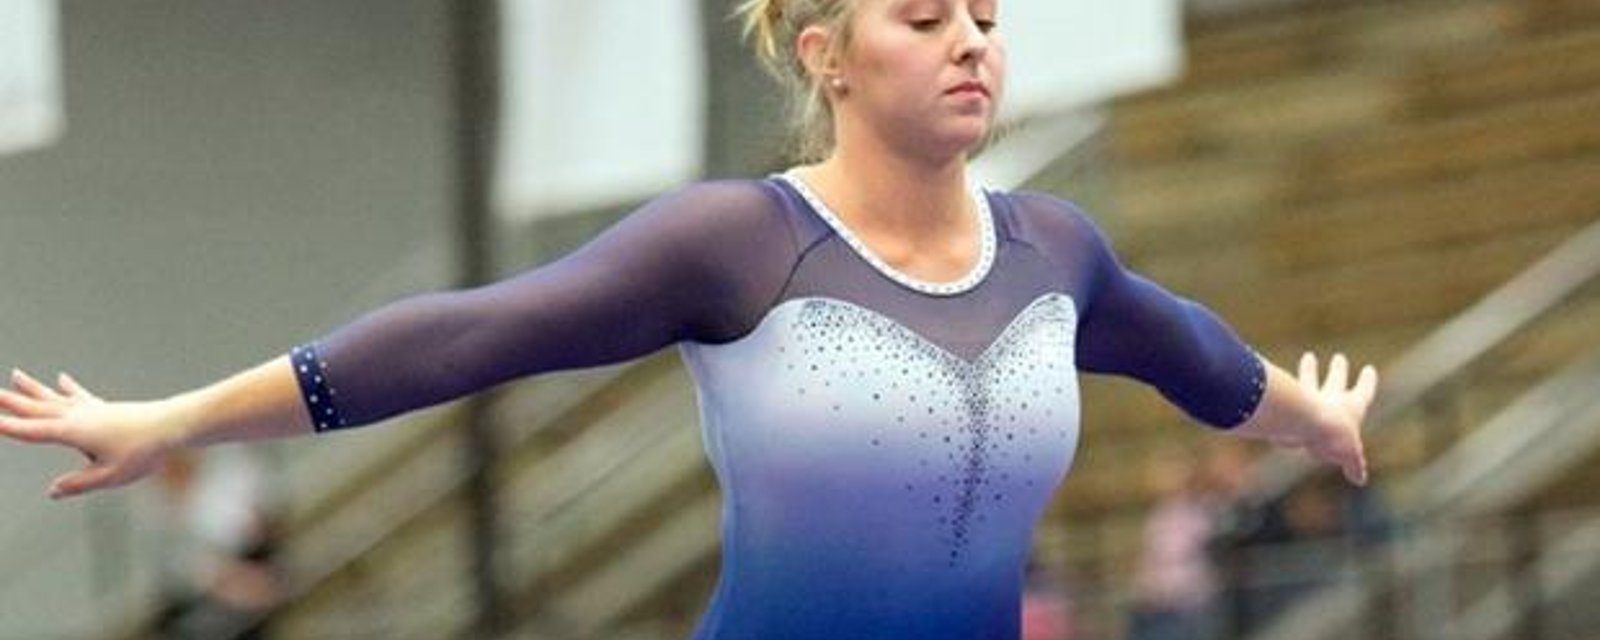 College gymnast Melanie Coleman dies after terrible fall during practice 